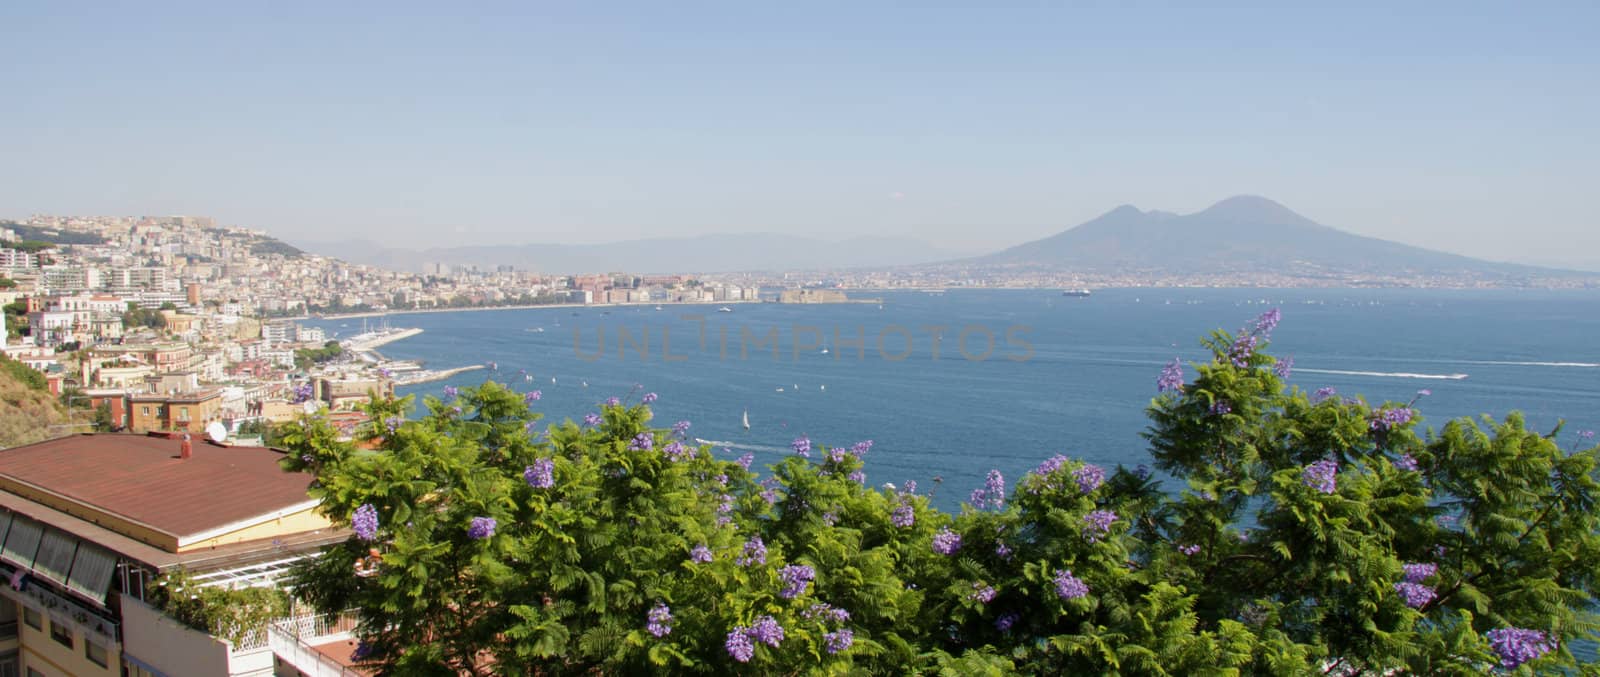 The Gulf of Naples
 by ca2hill